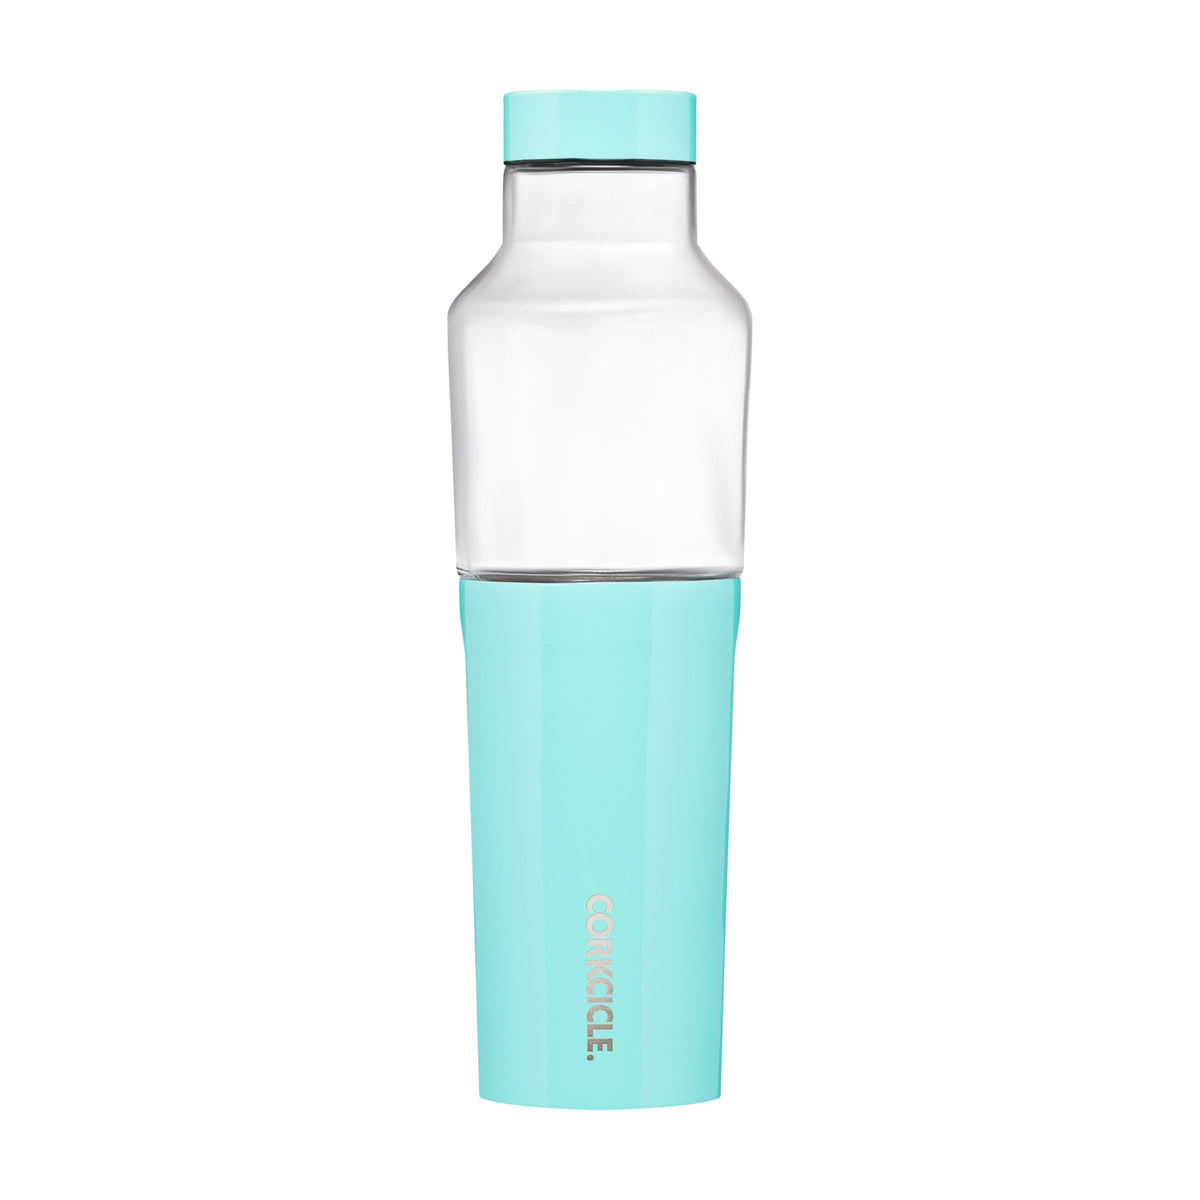 CORKCICLE - Hybrid Canteen Turquoise 20 oz